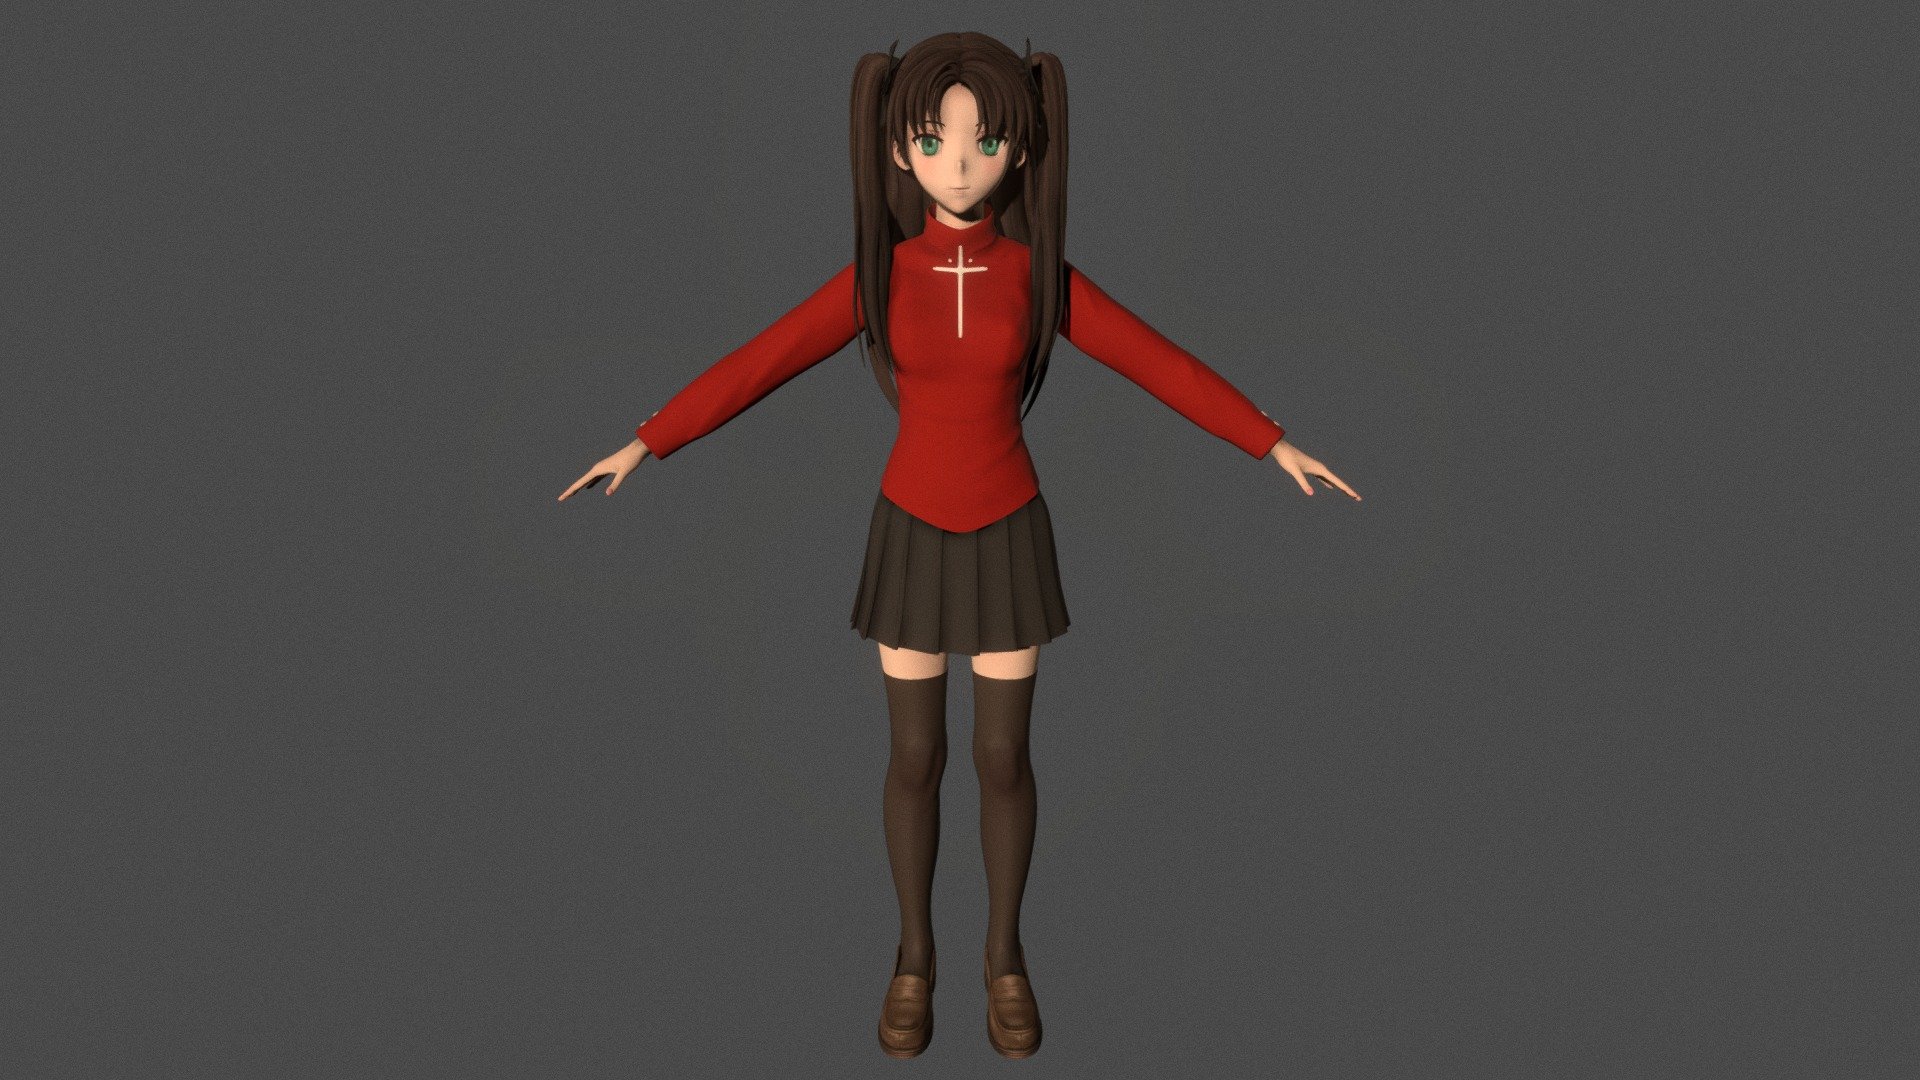 T-pose rigged model of anime girl Rin Tohsaka (Fate Stay Night).

Body and clothings are rigged and skinned by 3ds Max CAT system.

Eye direction and facial animation controlled by Morpher modifier / Shape Keys / Blendshape.

This product include .FBX (ver. 7200) and .MAX (ver. 2010) files.

3ds Max version is turbosmoothed to give a high quality render (as you can see here).

Original main body mesh have ~7.000 polys.

This 3D model may need some tweaking to adapt the rig system to games engine and other platforms.

I support convert model to various file formats (the rig data will be lost in this process): 3DS; AI; ASE; DAE; DWF; DWG; DXF; FLT; HTR; IGS; M3G; MQO; OBJ; SAT; STL; W3D; WRL; X.

You can buy all of my models in one pack to save cost: https://sketchfab.com/3d-models/all-of-my-anime-girls-c5a56156994e4193b9e8fa21a3b8360b

And I can make commission models.

If you have any questions, please leave a comment or contact me via my email 3d.eden.project@gmail.com 3d model